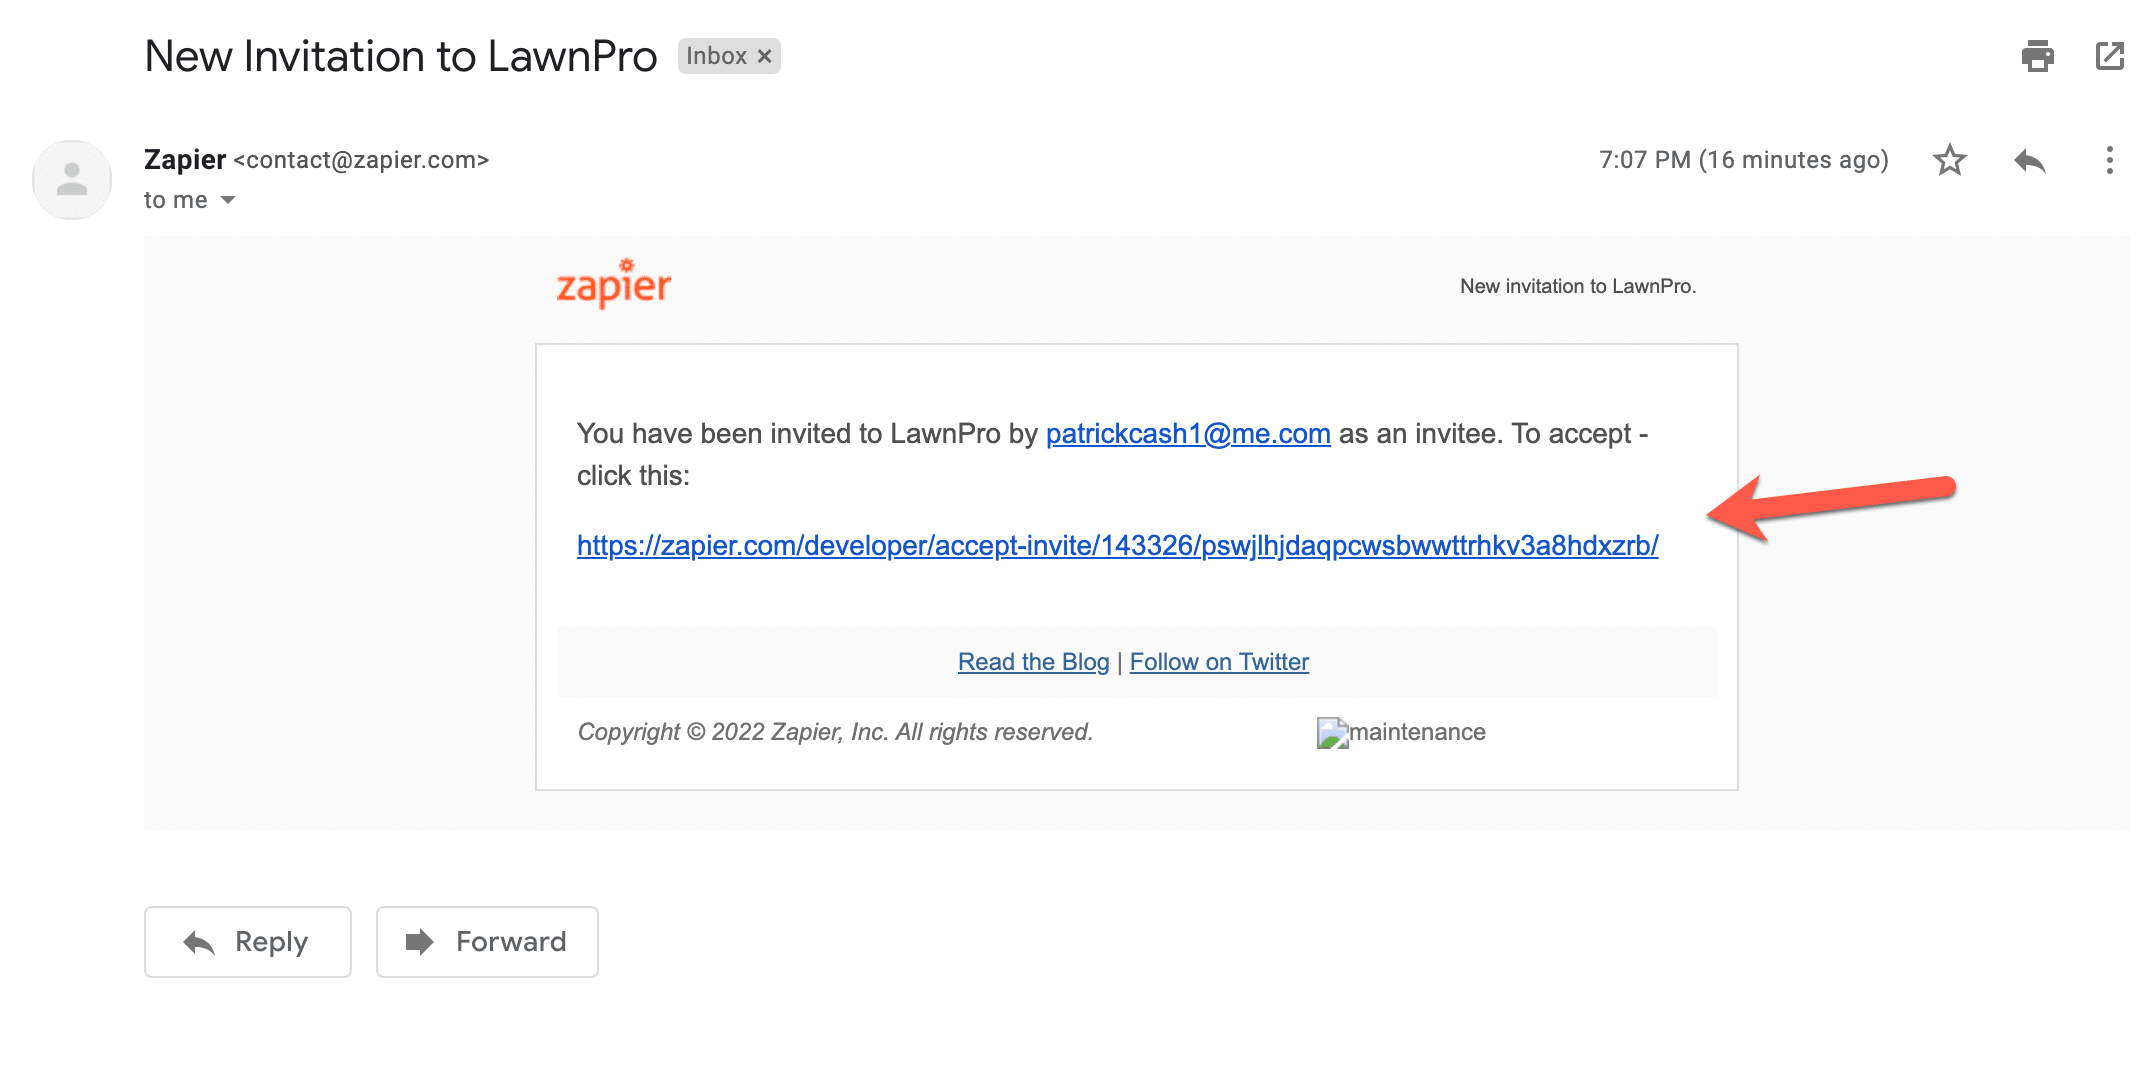 Getting started with Zapier